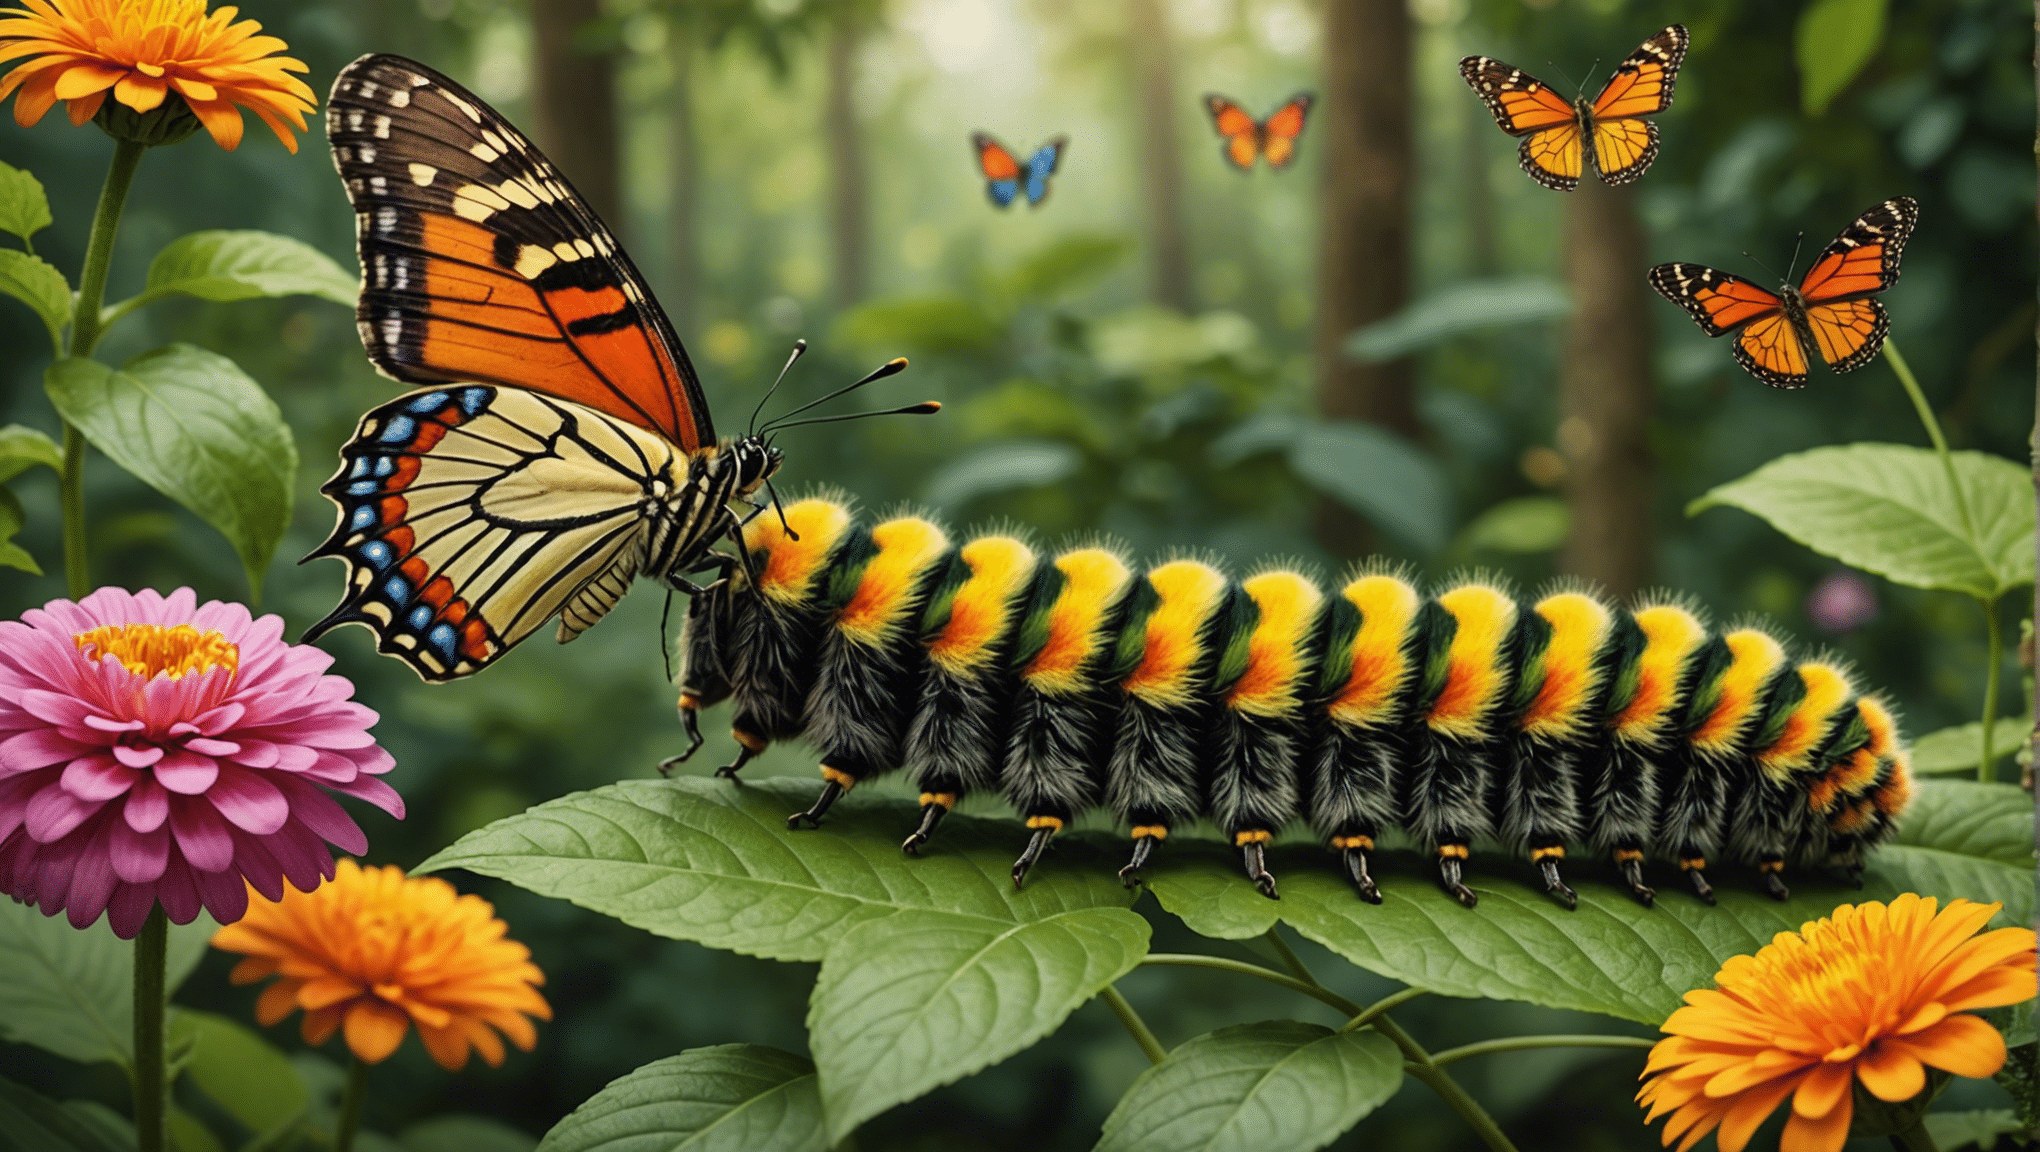 learn about the miraculous transformation of a caterpillar into a butterfly and explore the fascinating process of metamorphosis in nature.